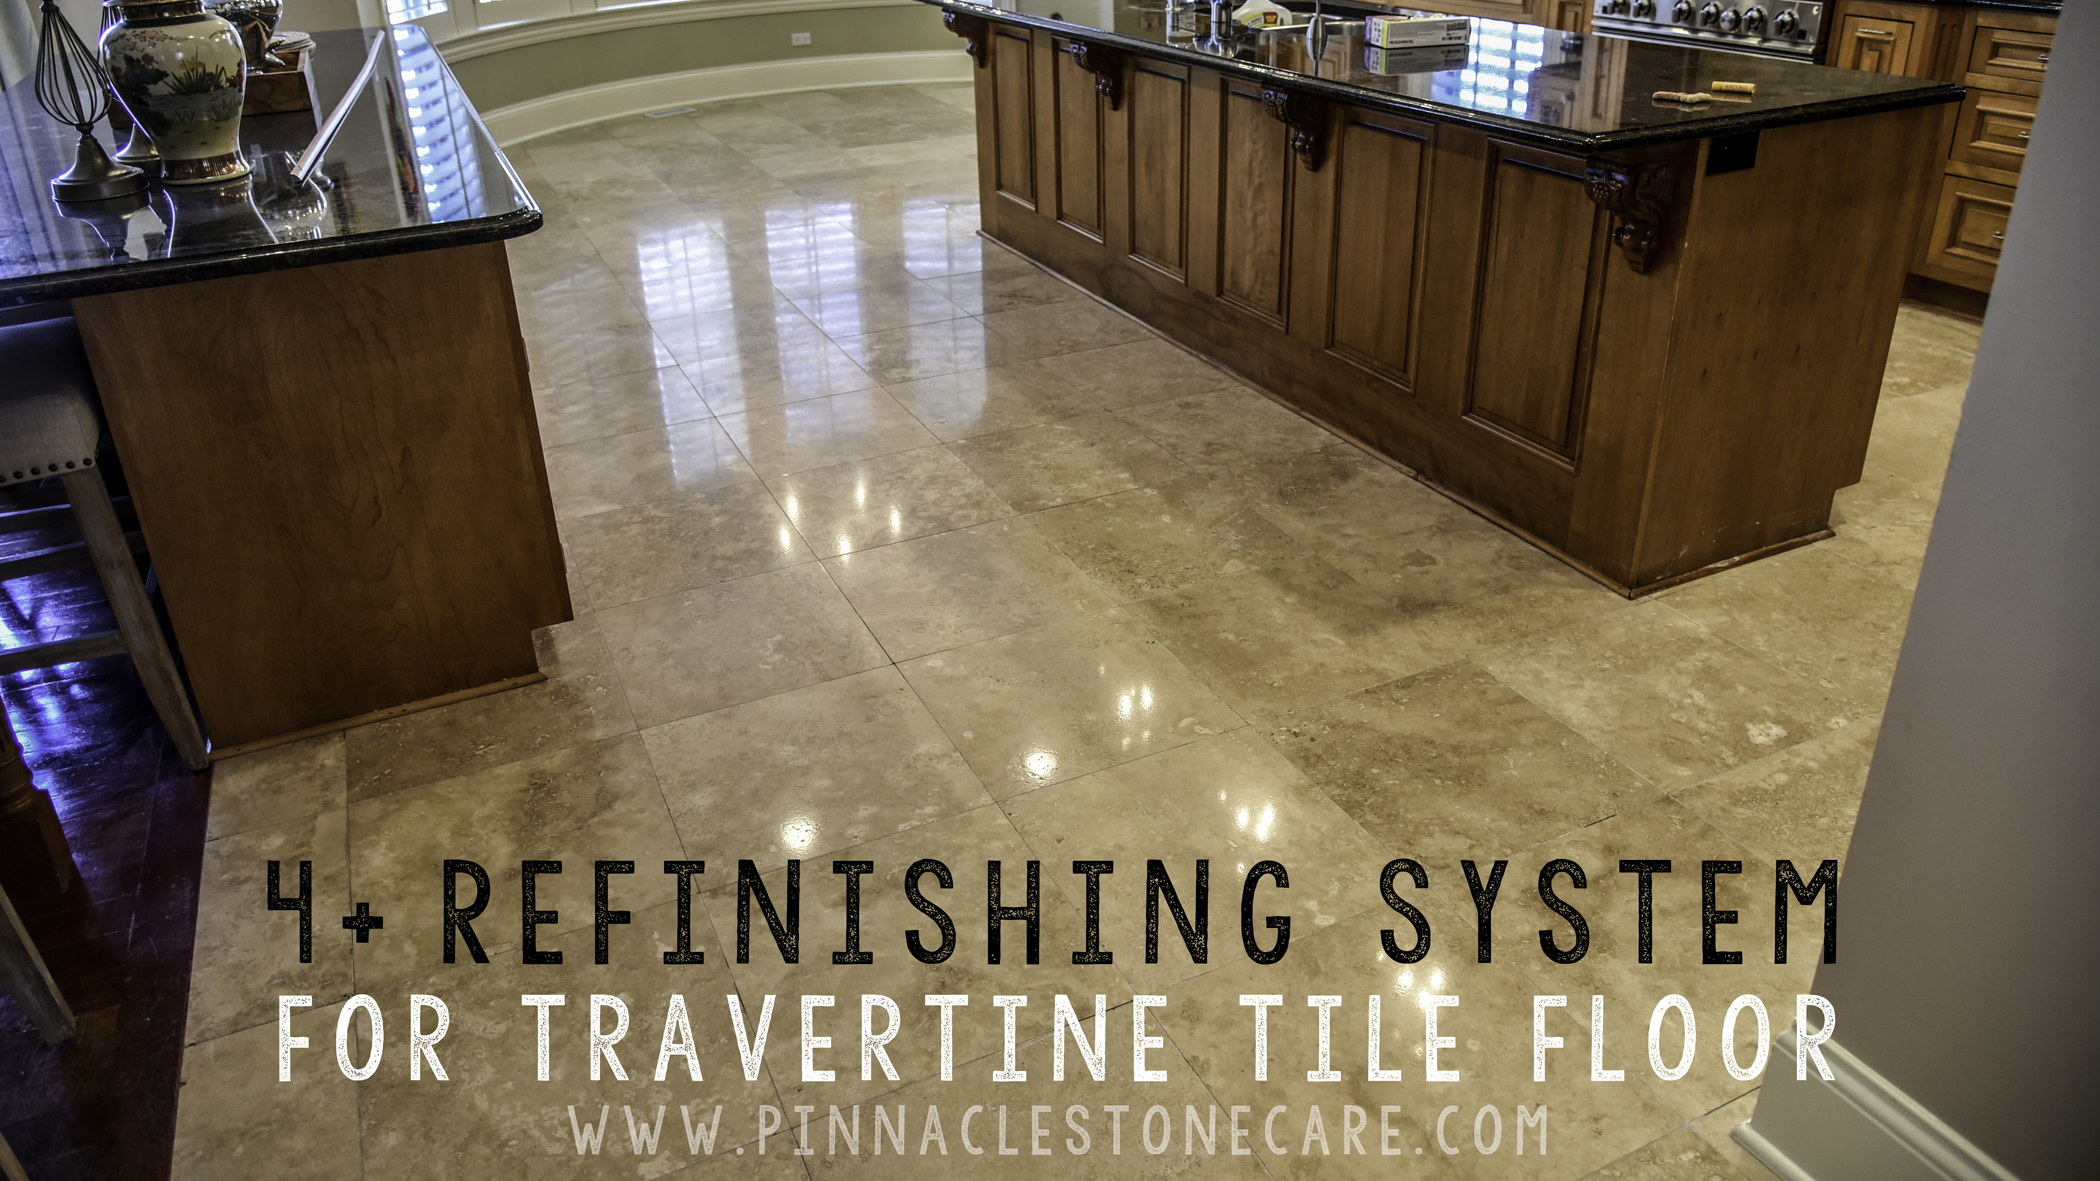 TRAVERTINE TILE FLOOR RESTORATION (stripping, honing, polishing, grout cleaning, hole filling)